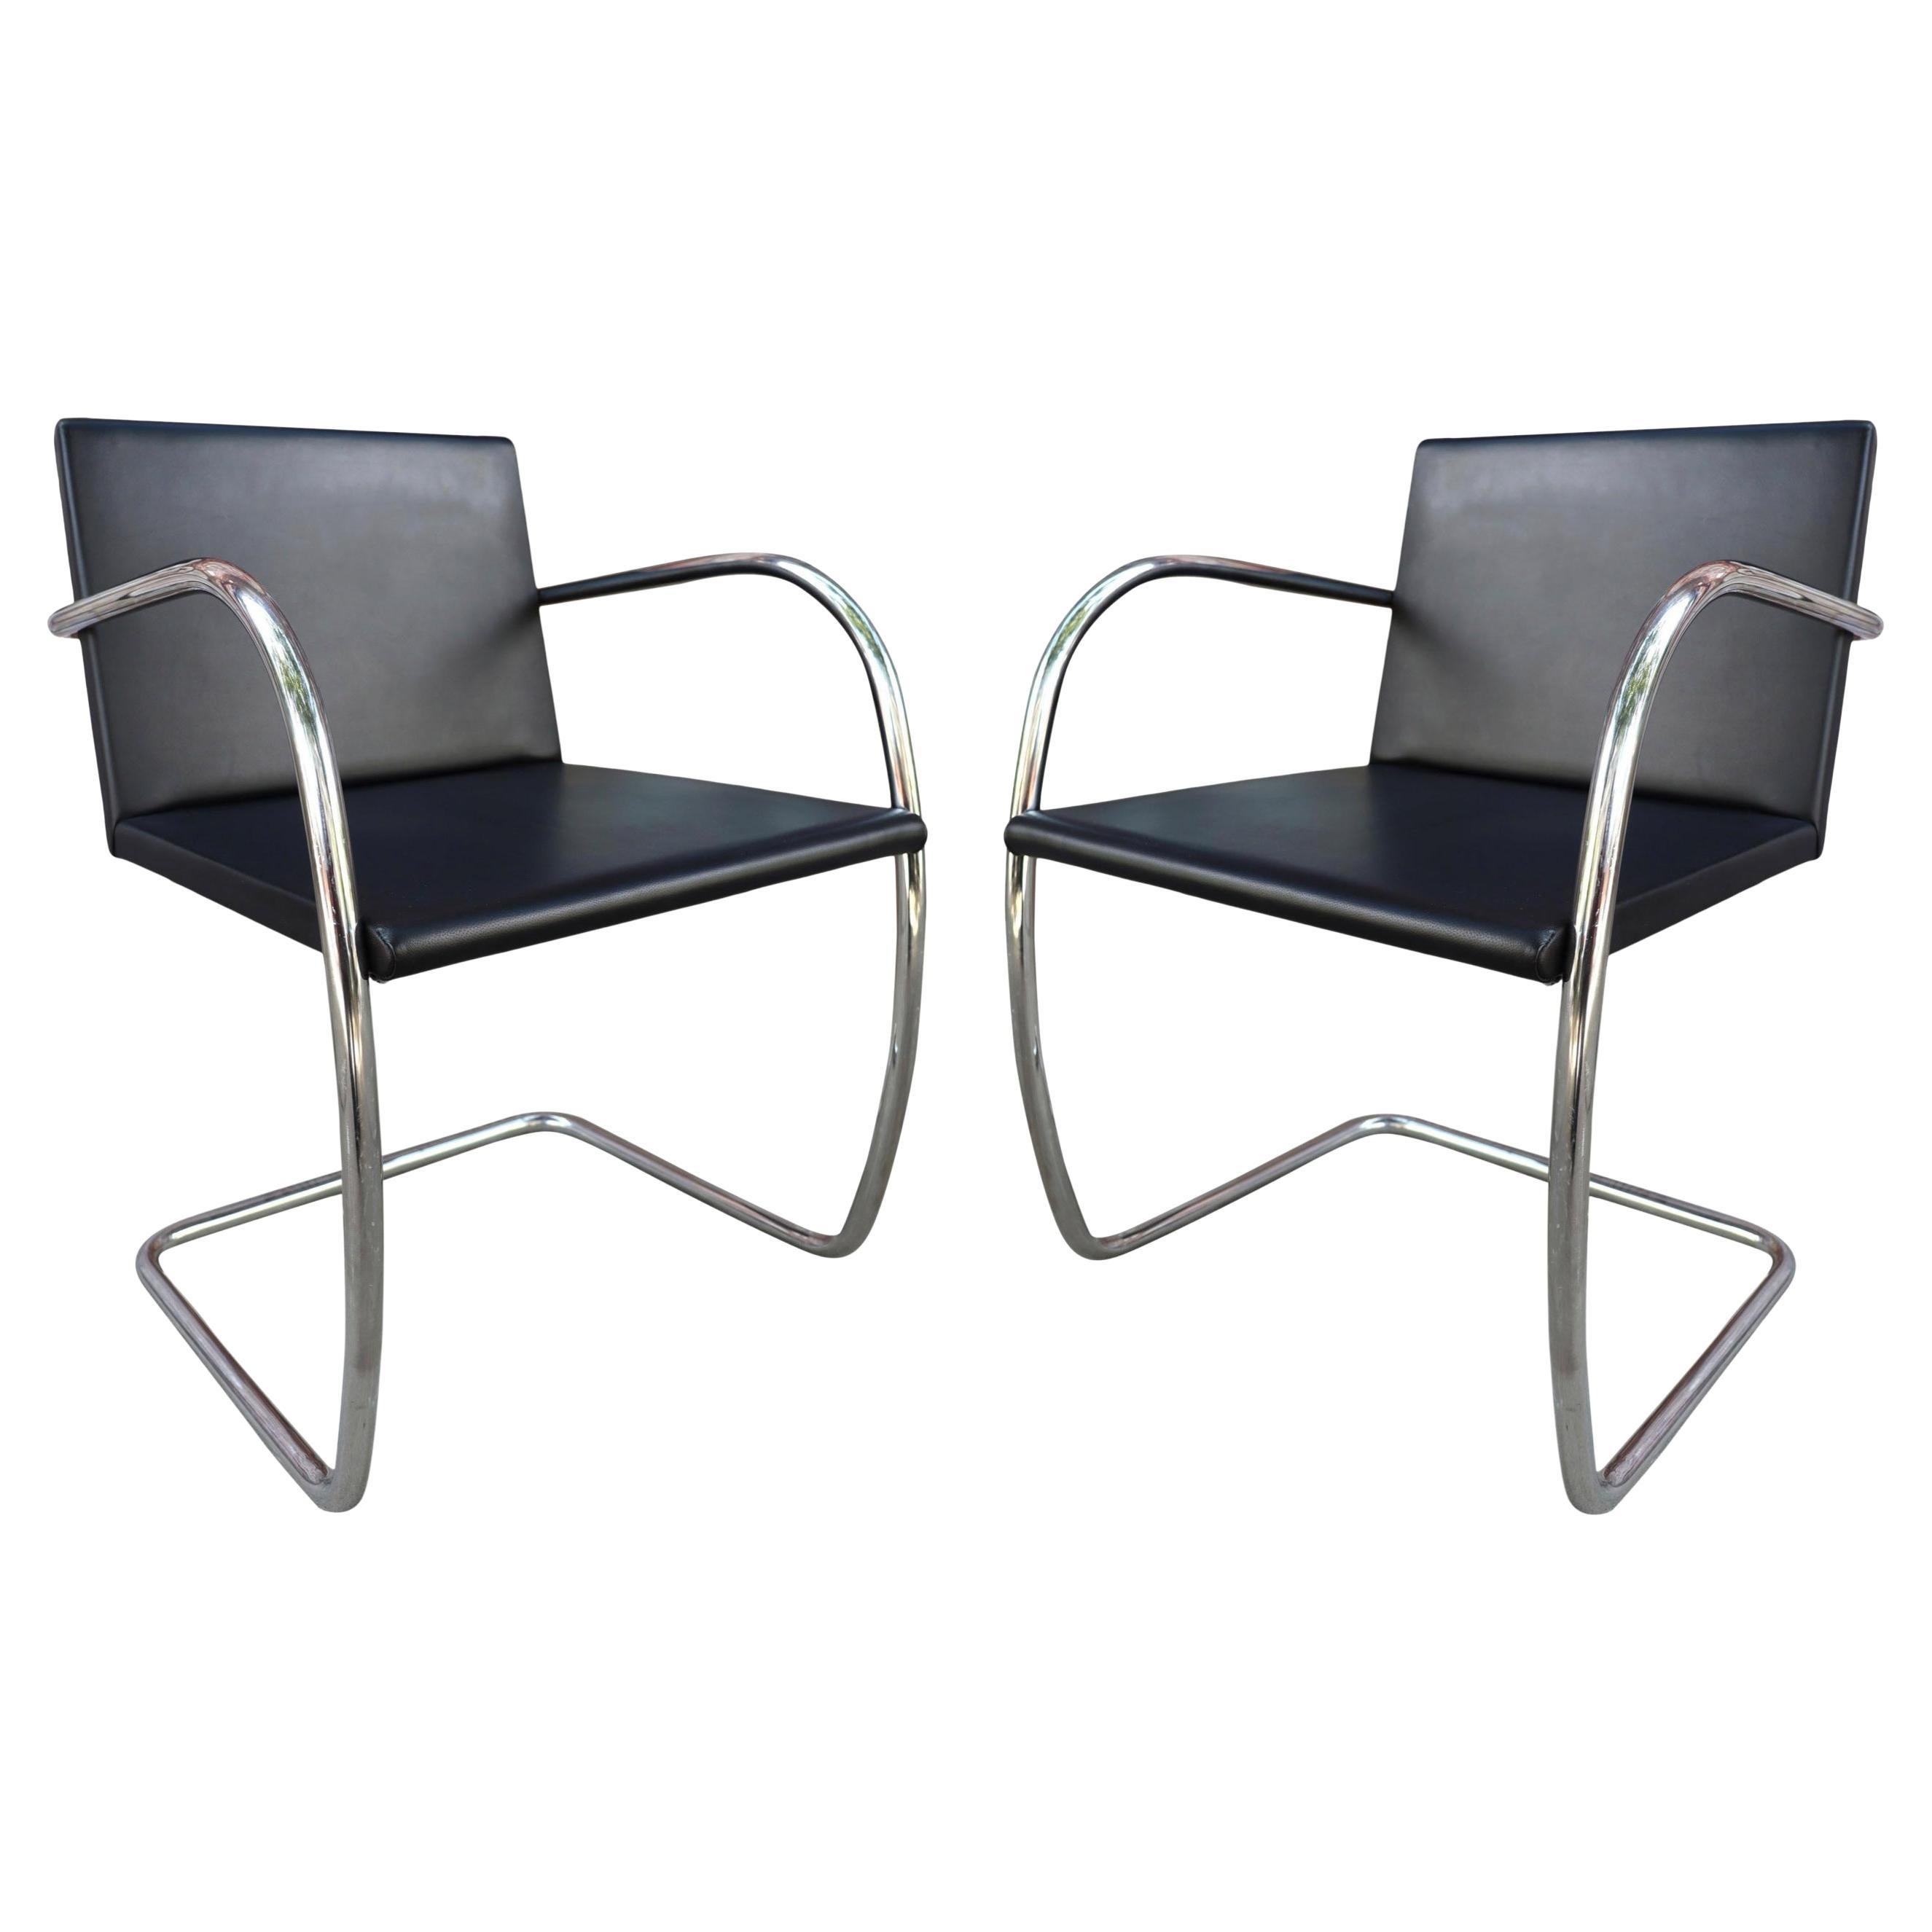 Authentic Pair of Knoll Brno Chairs by Mies Van Der Rohe